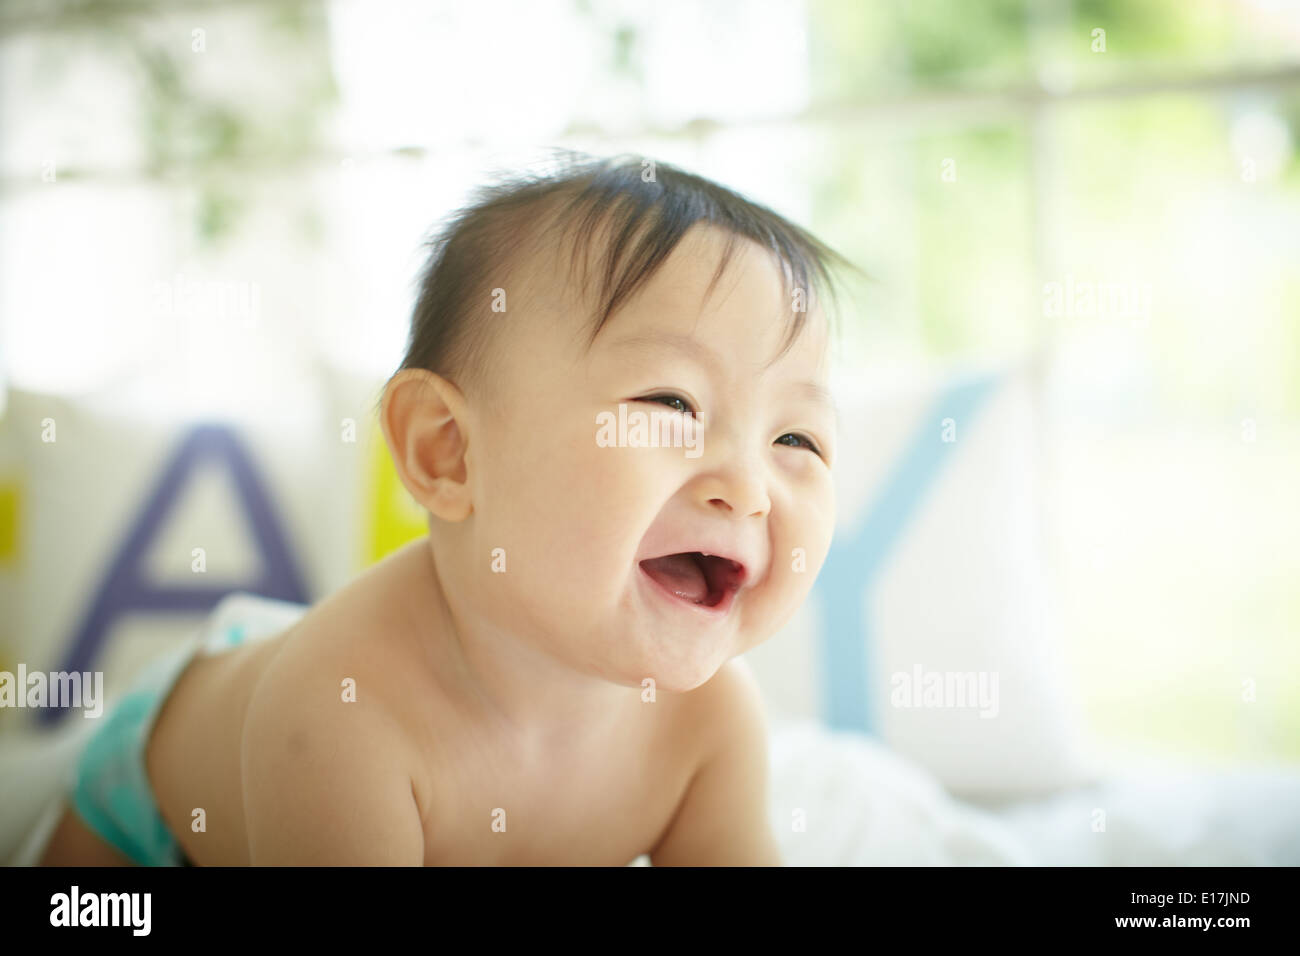 Baby with a big and cute smile Stock Photo